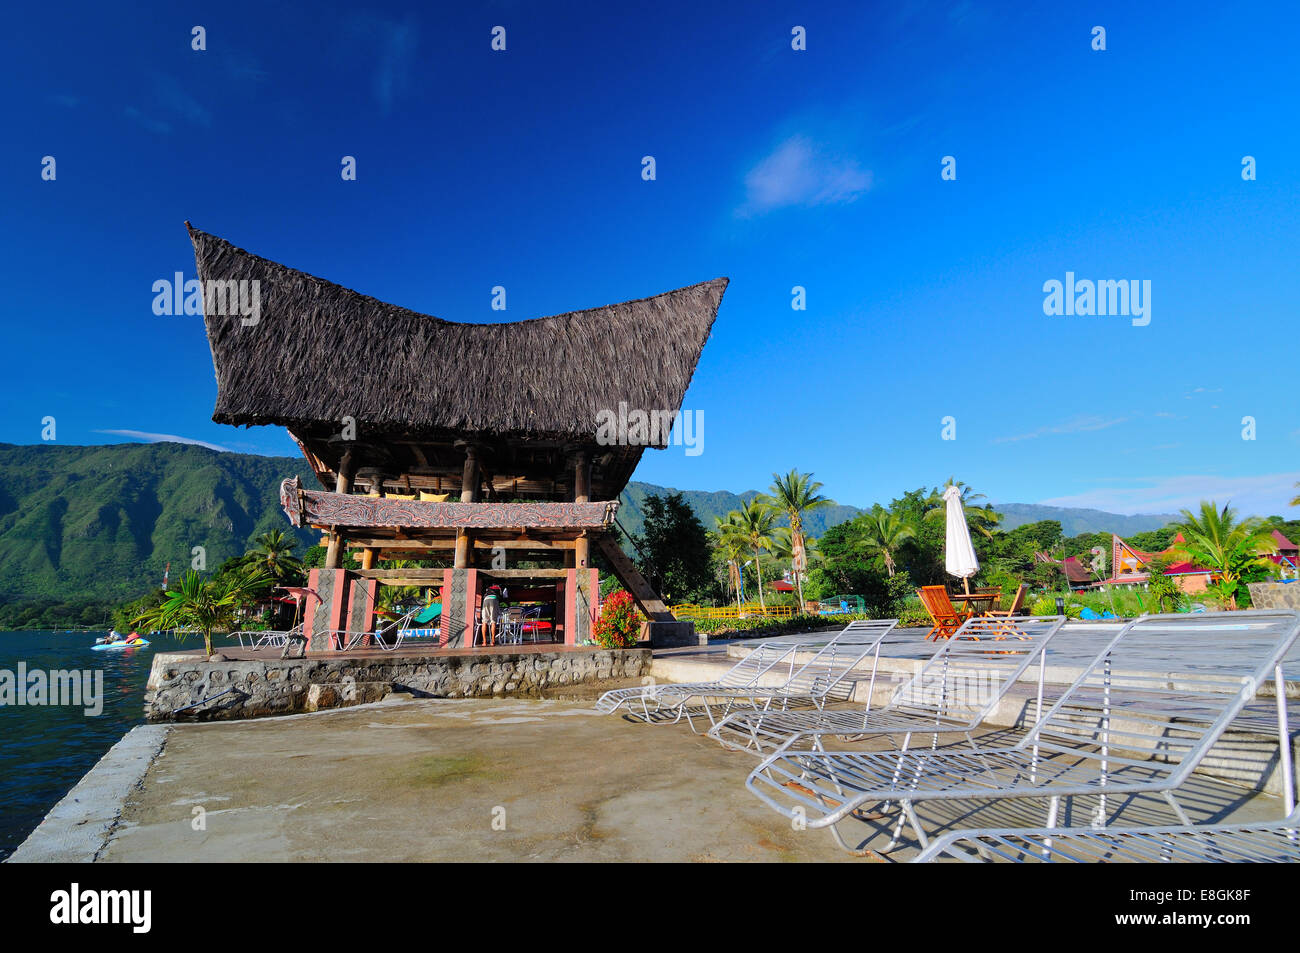 Indonesia, Samosir Island, Lake Toba, Cottage with thatched roof Stock Photo